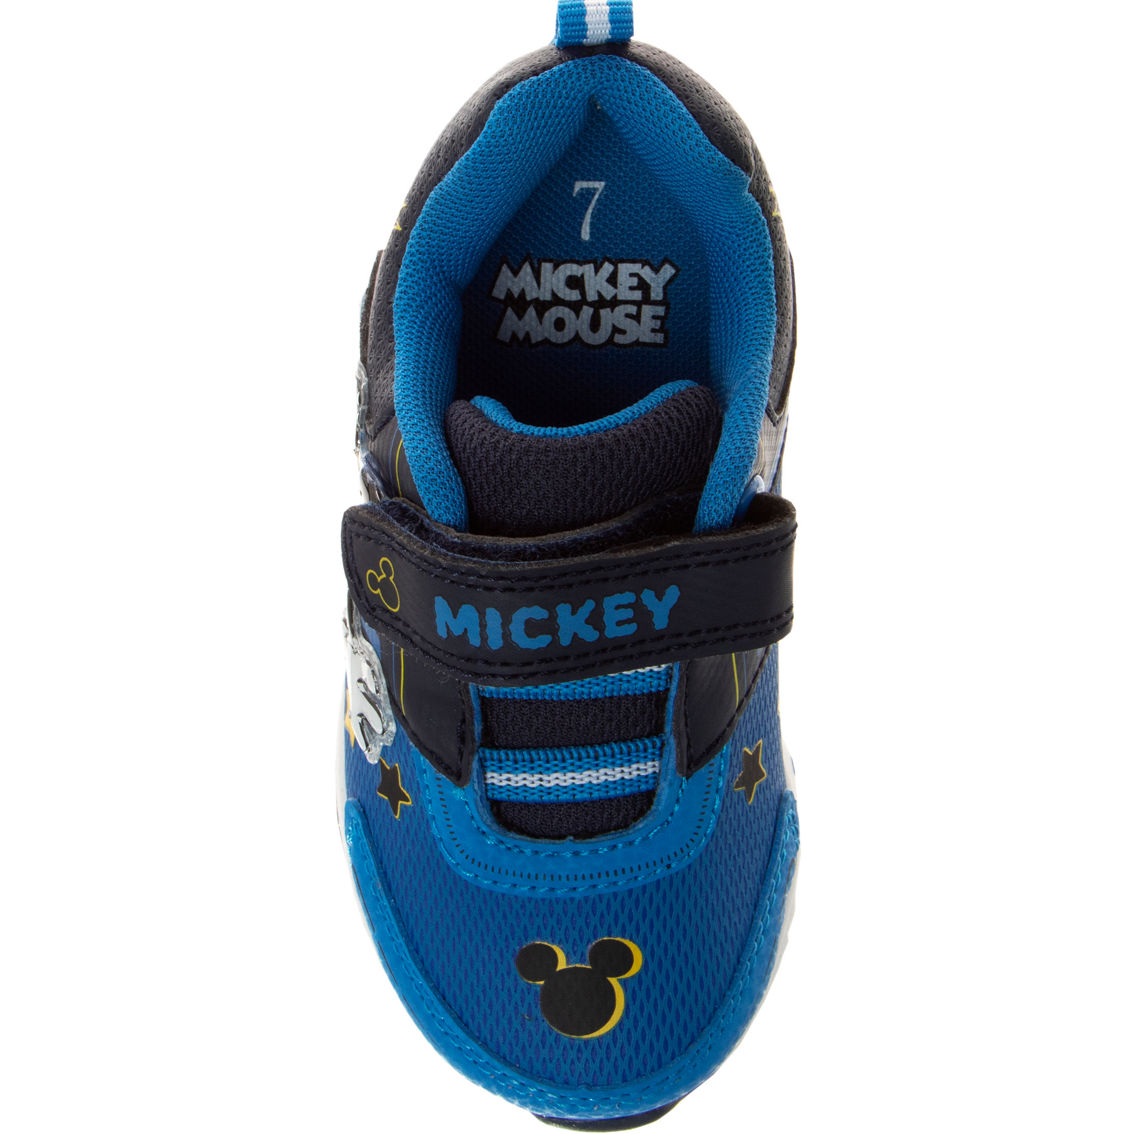 Mickey Mouse Toddler Boys Sneakers - Image 4 of 5